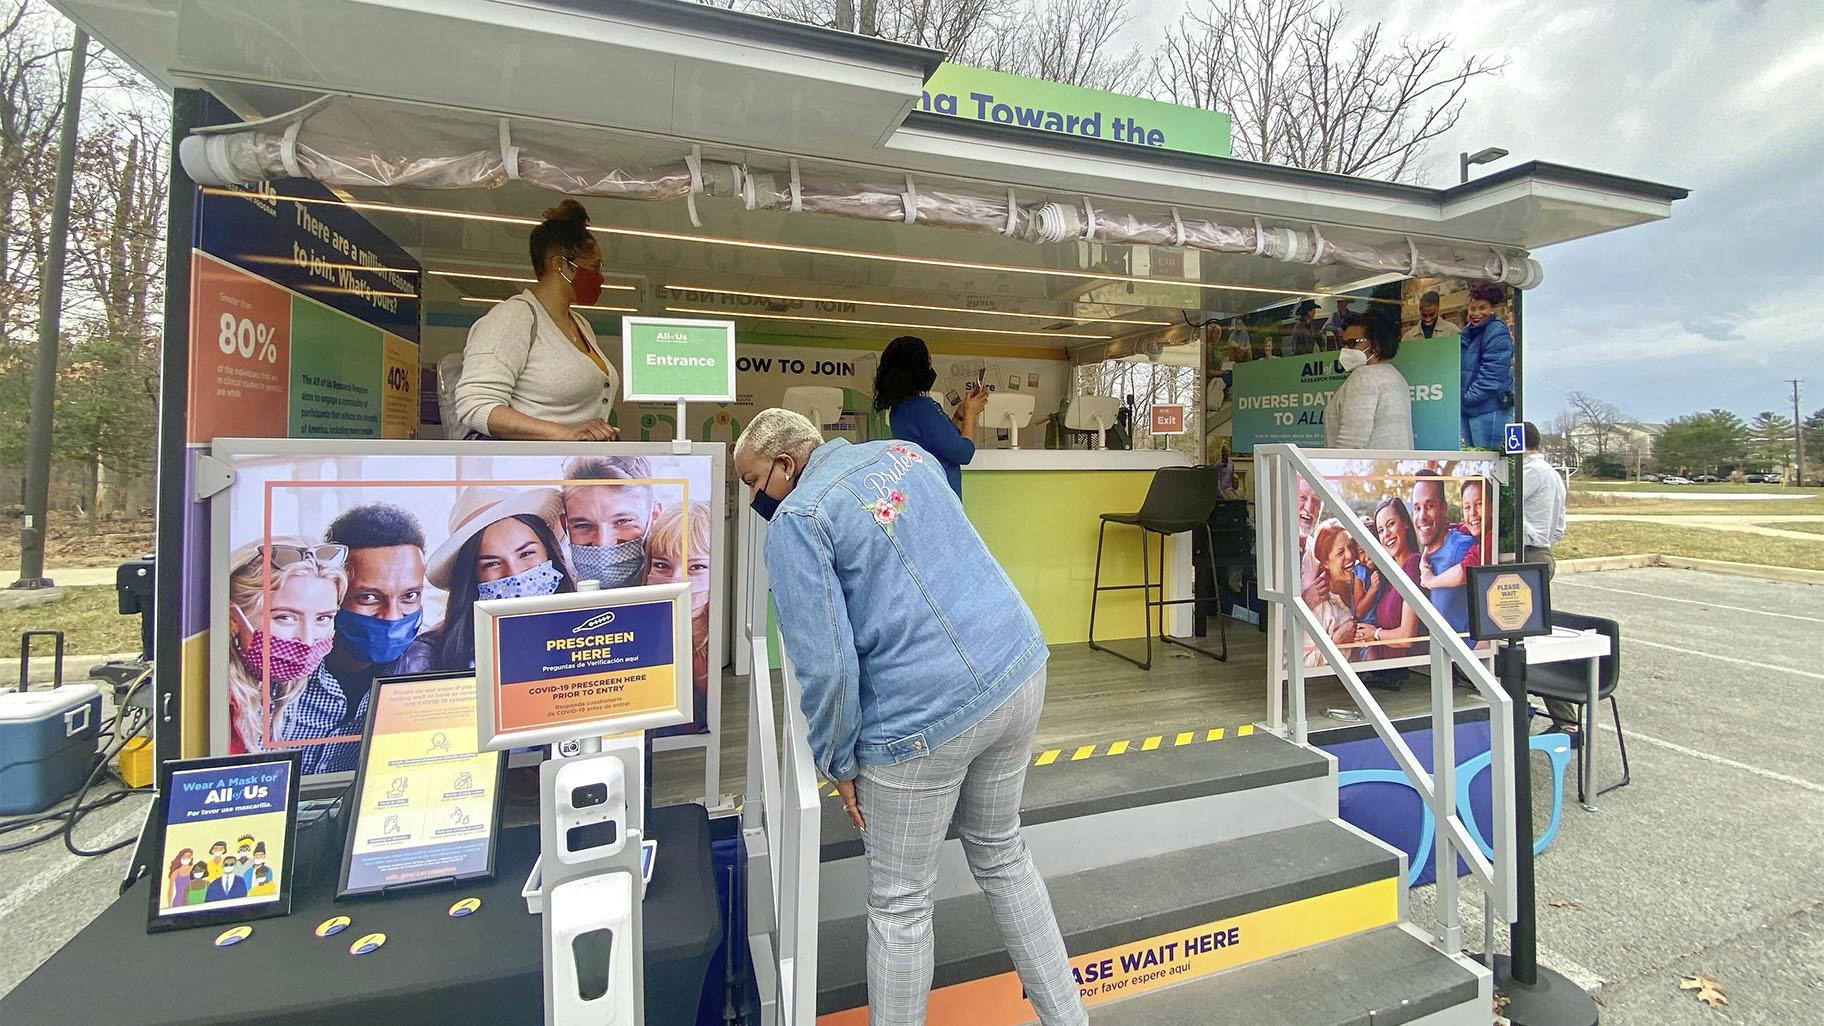 In this photo provided by the National Institute of Health’s “All of Us” research program, people visit a study vehicle in Silver Spring, Md. on March 8, 2022. (Dianne Beltran / All of Us Research Program via AP)